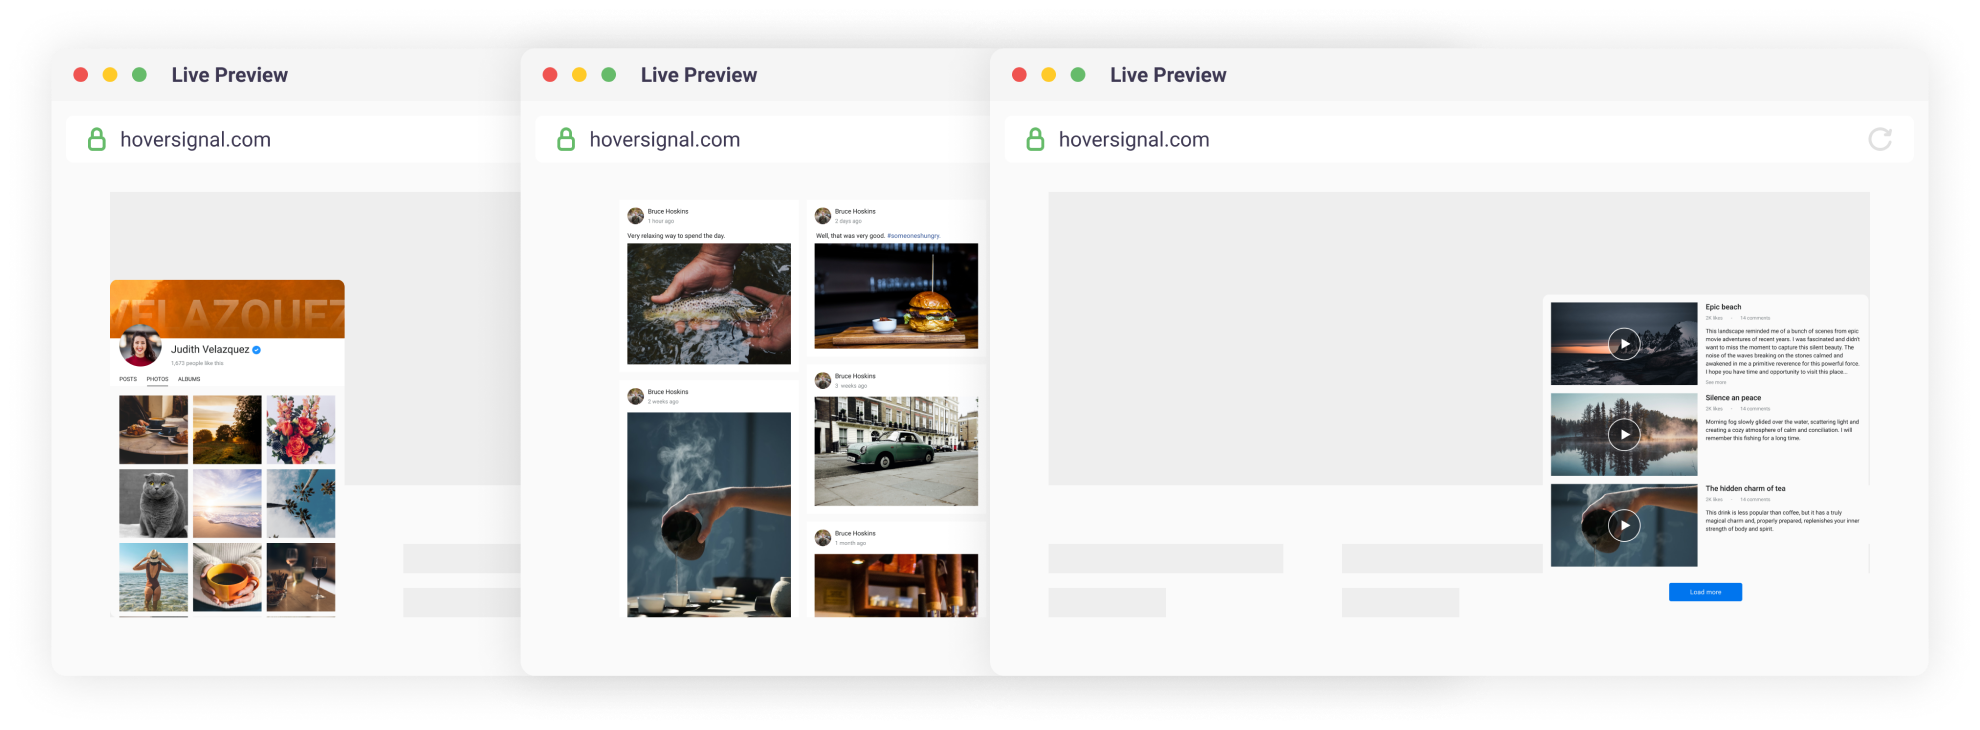 Hoversignal — Facebook Feed, designed with interface flexibility